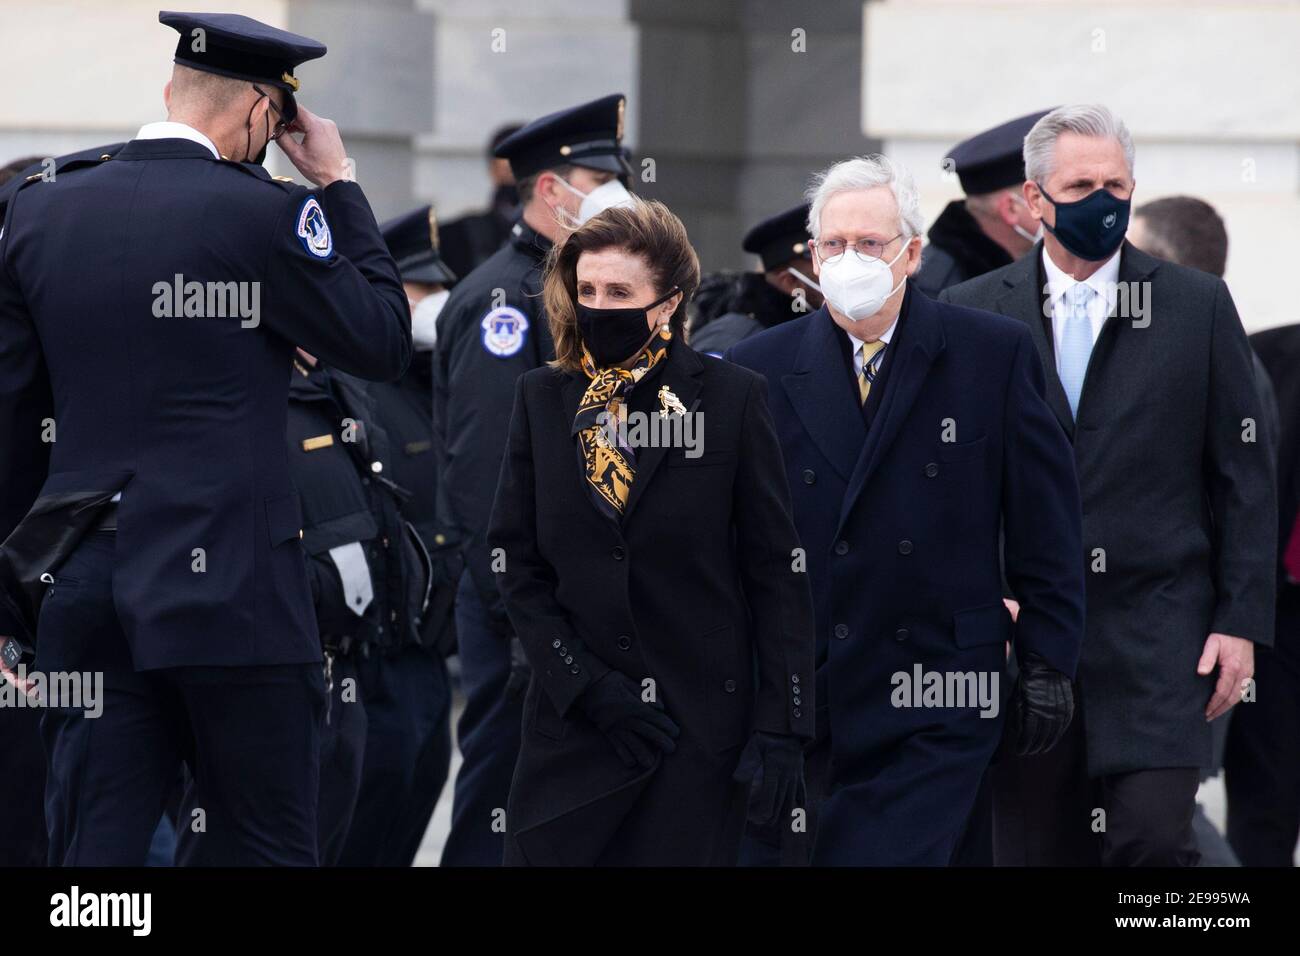 U.S. Speaker of the House Nancy Pelosi (L), Senate Minority Leader Mitch McConnell (C) and House Minority Leader Kevin McCarthy (R) walk out to watch the remains of Capitol Police Officer Brian Sicknick being carried down the East Front steps after 'lying in honor' in the Rotunda of the Capitol in Washington, DC, USA, 03 February 2021. Officer Sicknick was fatally injured while physically engaging with the mob at the US Capitol, on 06 January 2021.  (Photo by Pool/Sipa USA) Stock Photo